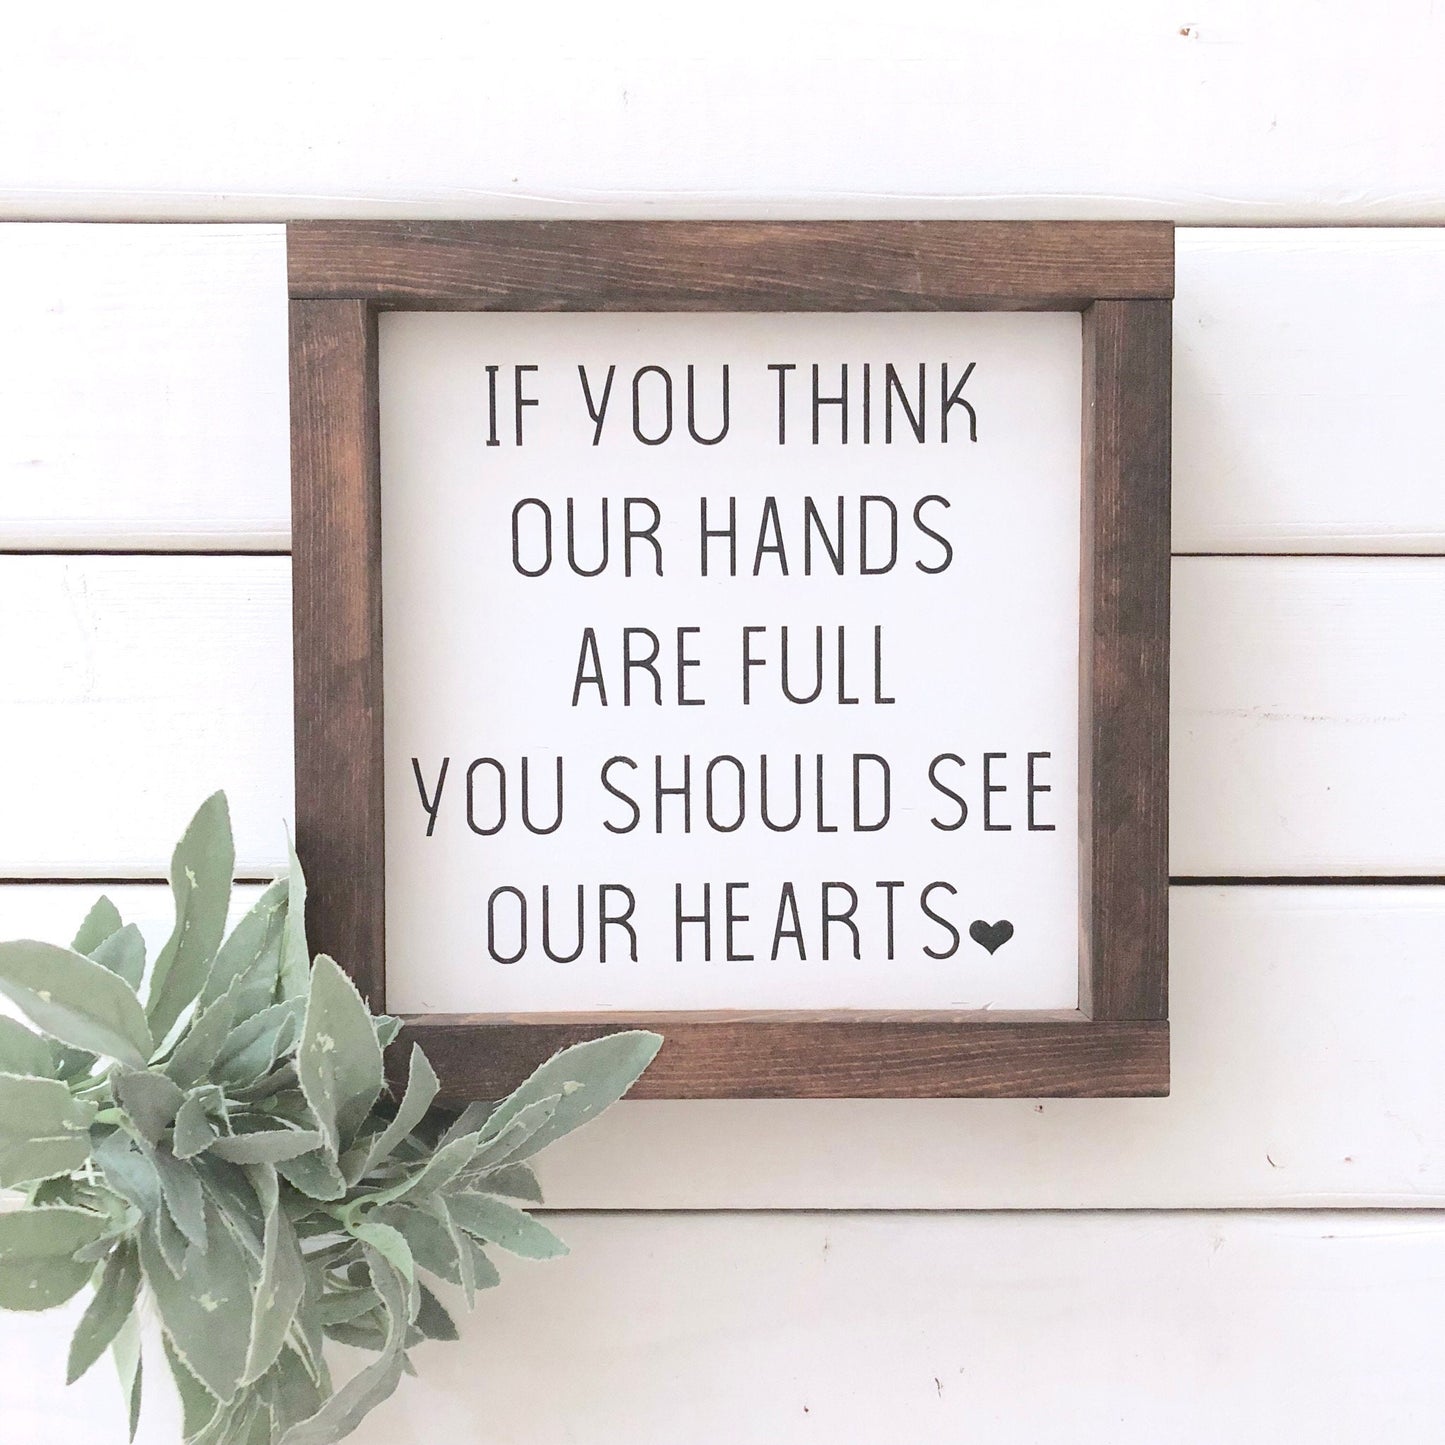 If You Think Our Hands Are Full, You Should See Our Hearts